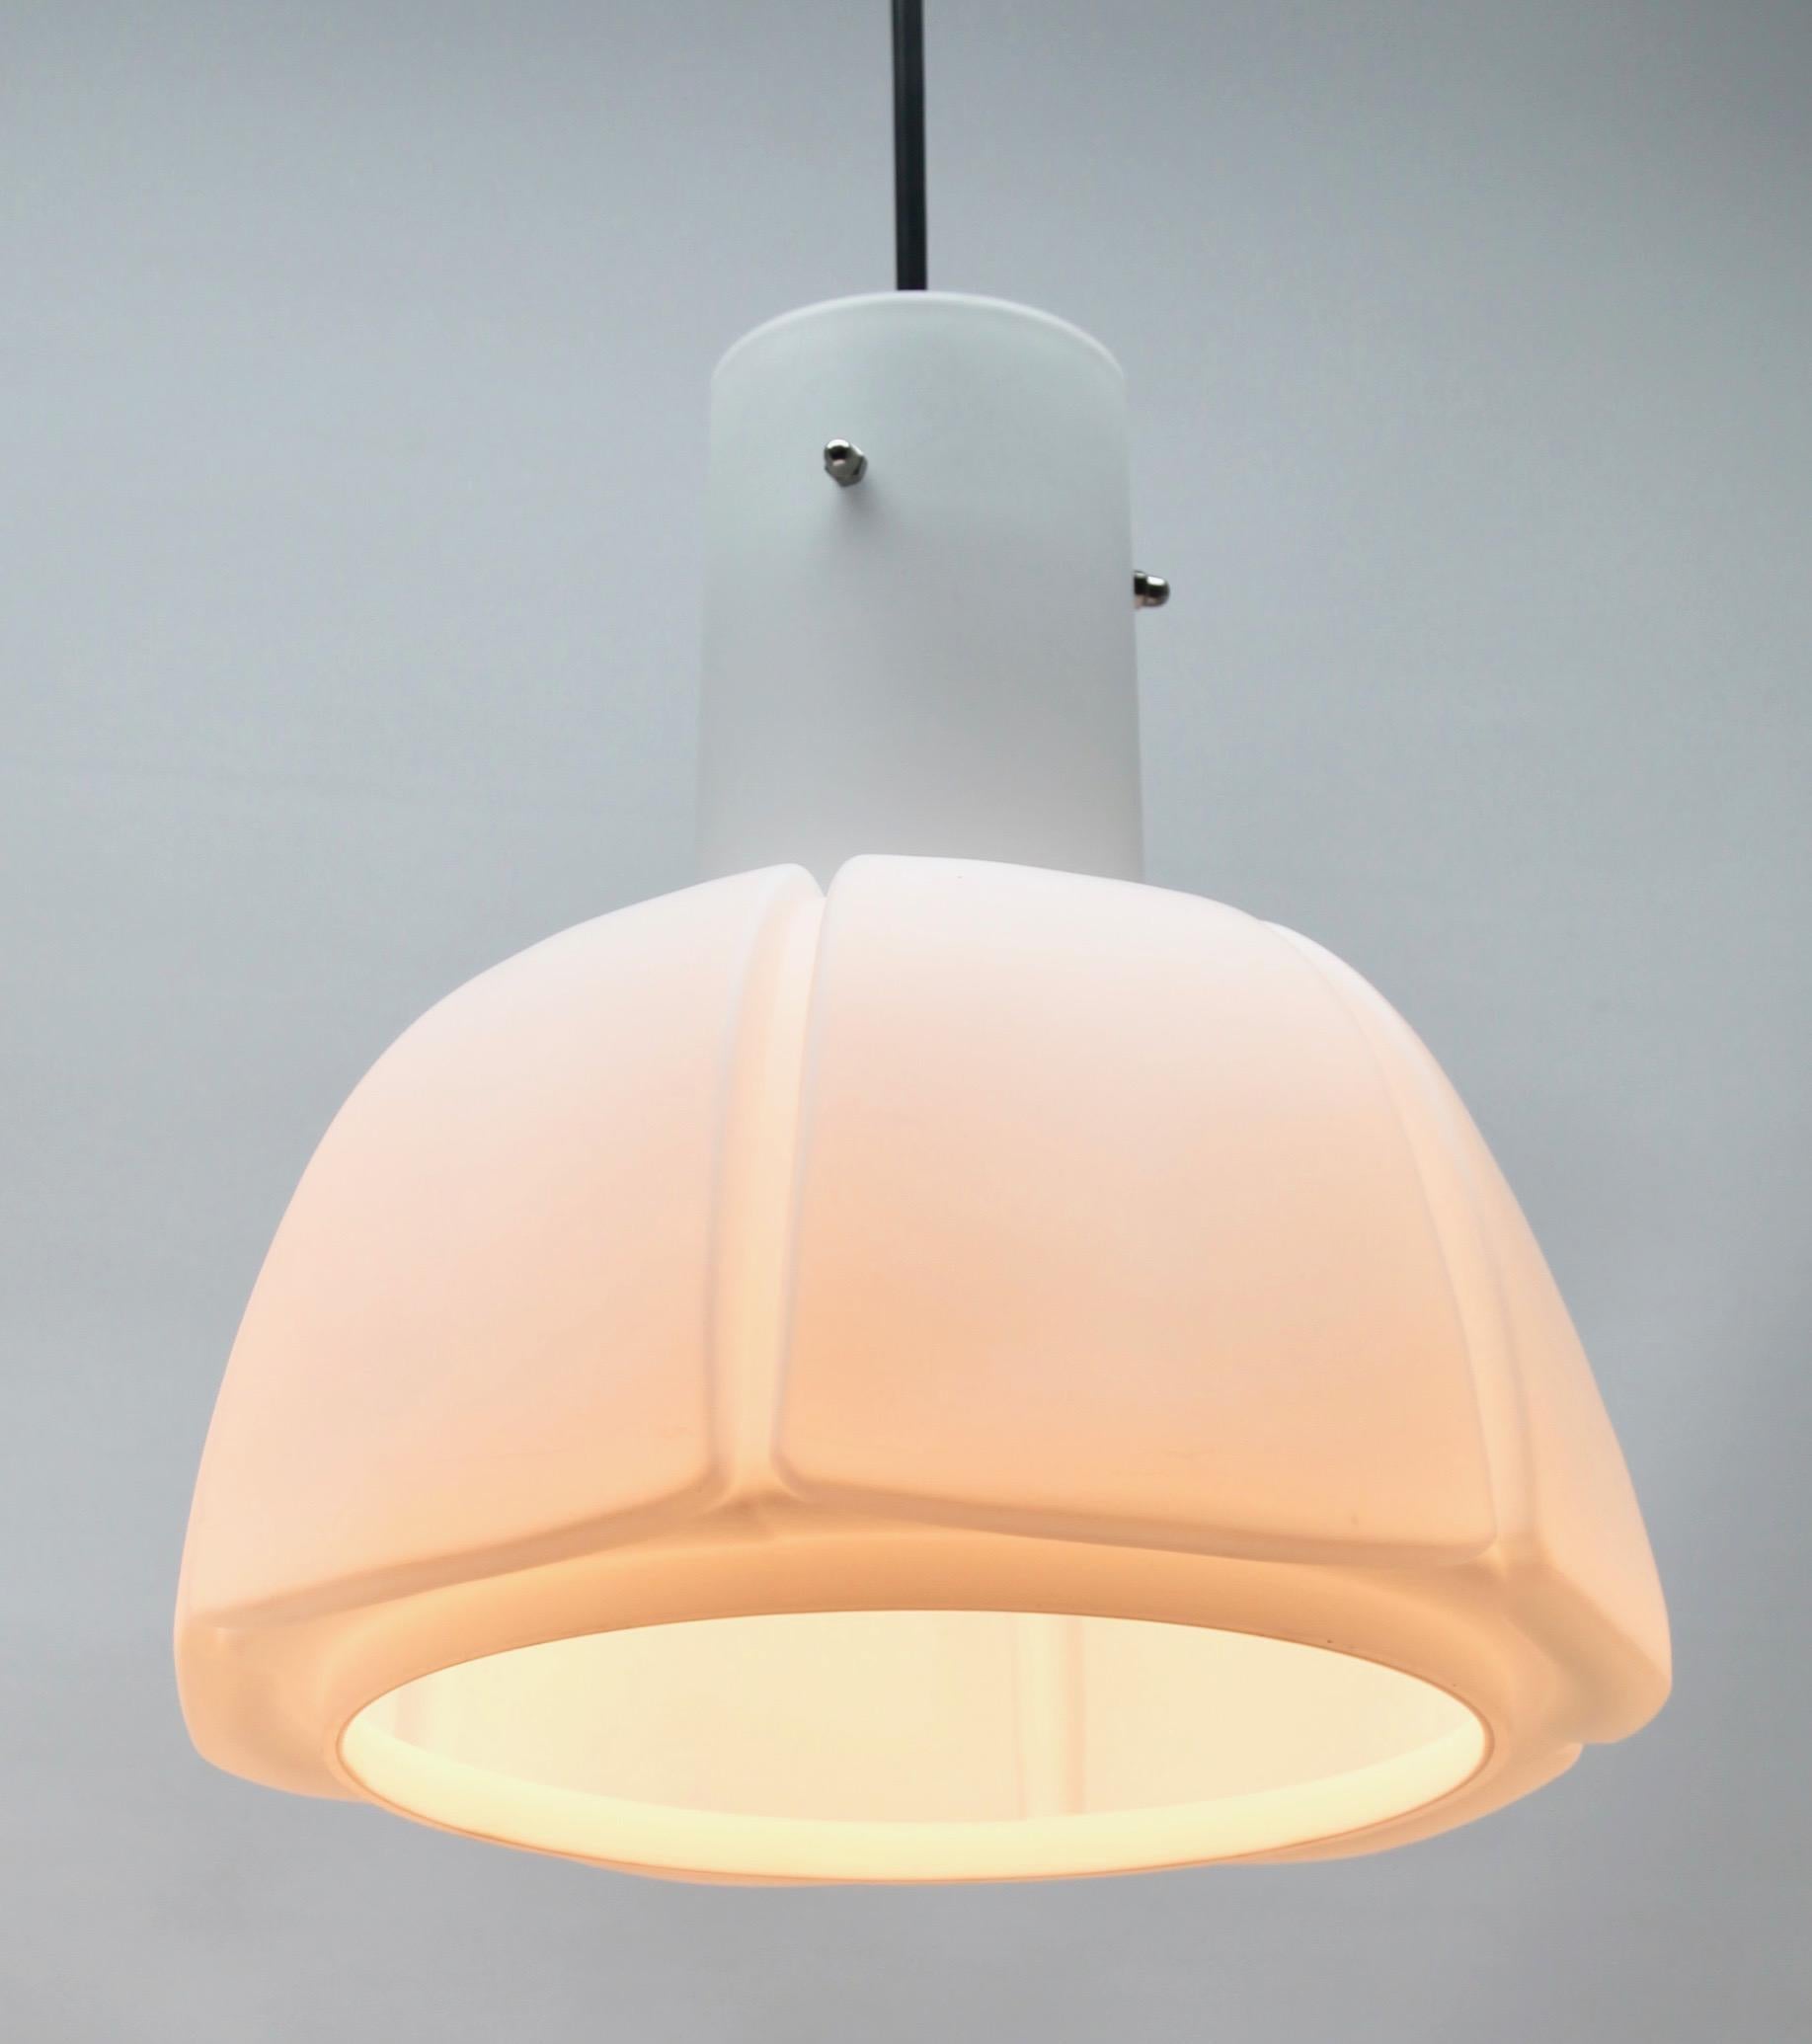 Glashütte Limburg Mid-Century Modern blown glass pendant/suspension fixture.

Size shade: Height 30 cm 11.81 inch, diameter 30 cm 11.81 inch 
On an adjustable cable.
As service: We can adjust the lamp height for you in advance if needed.